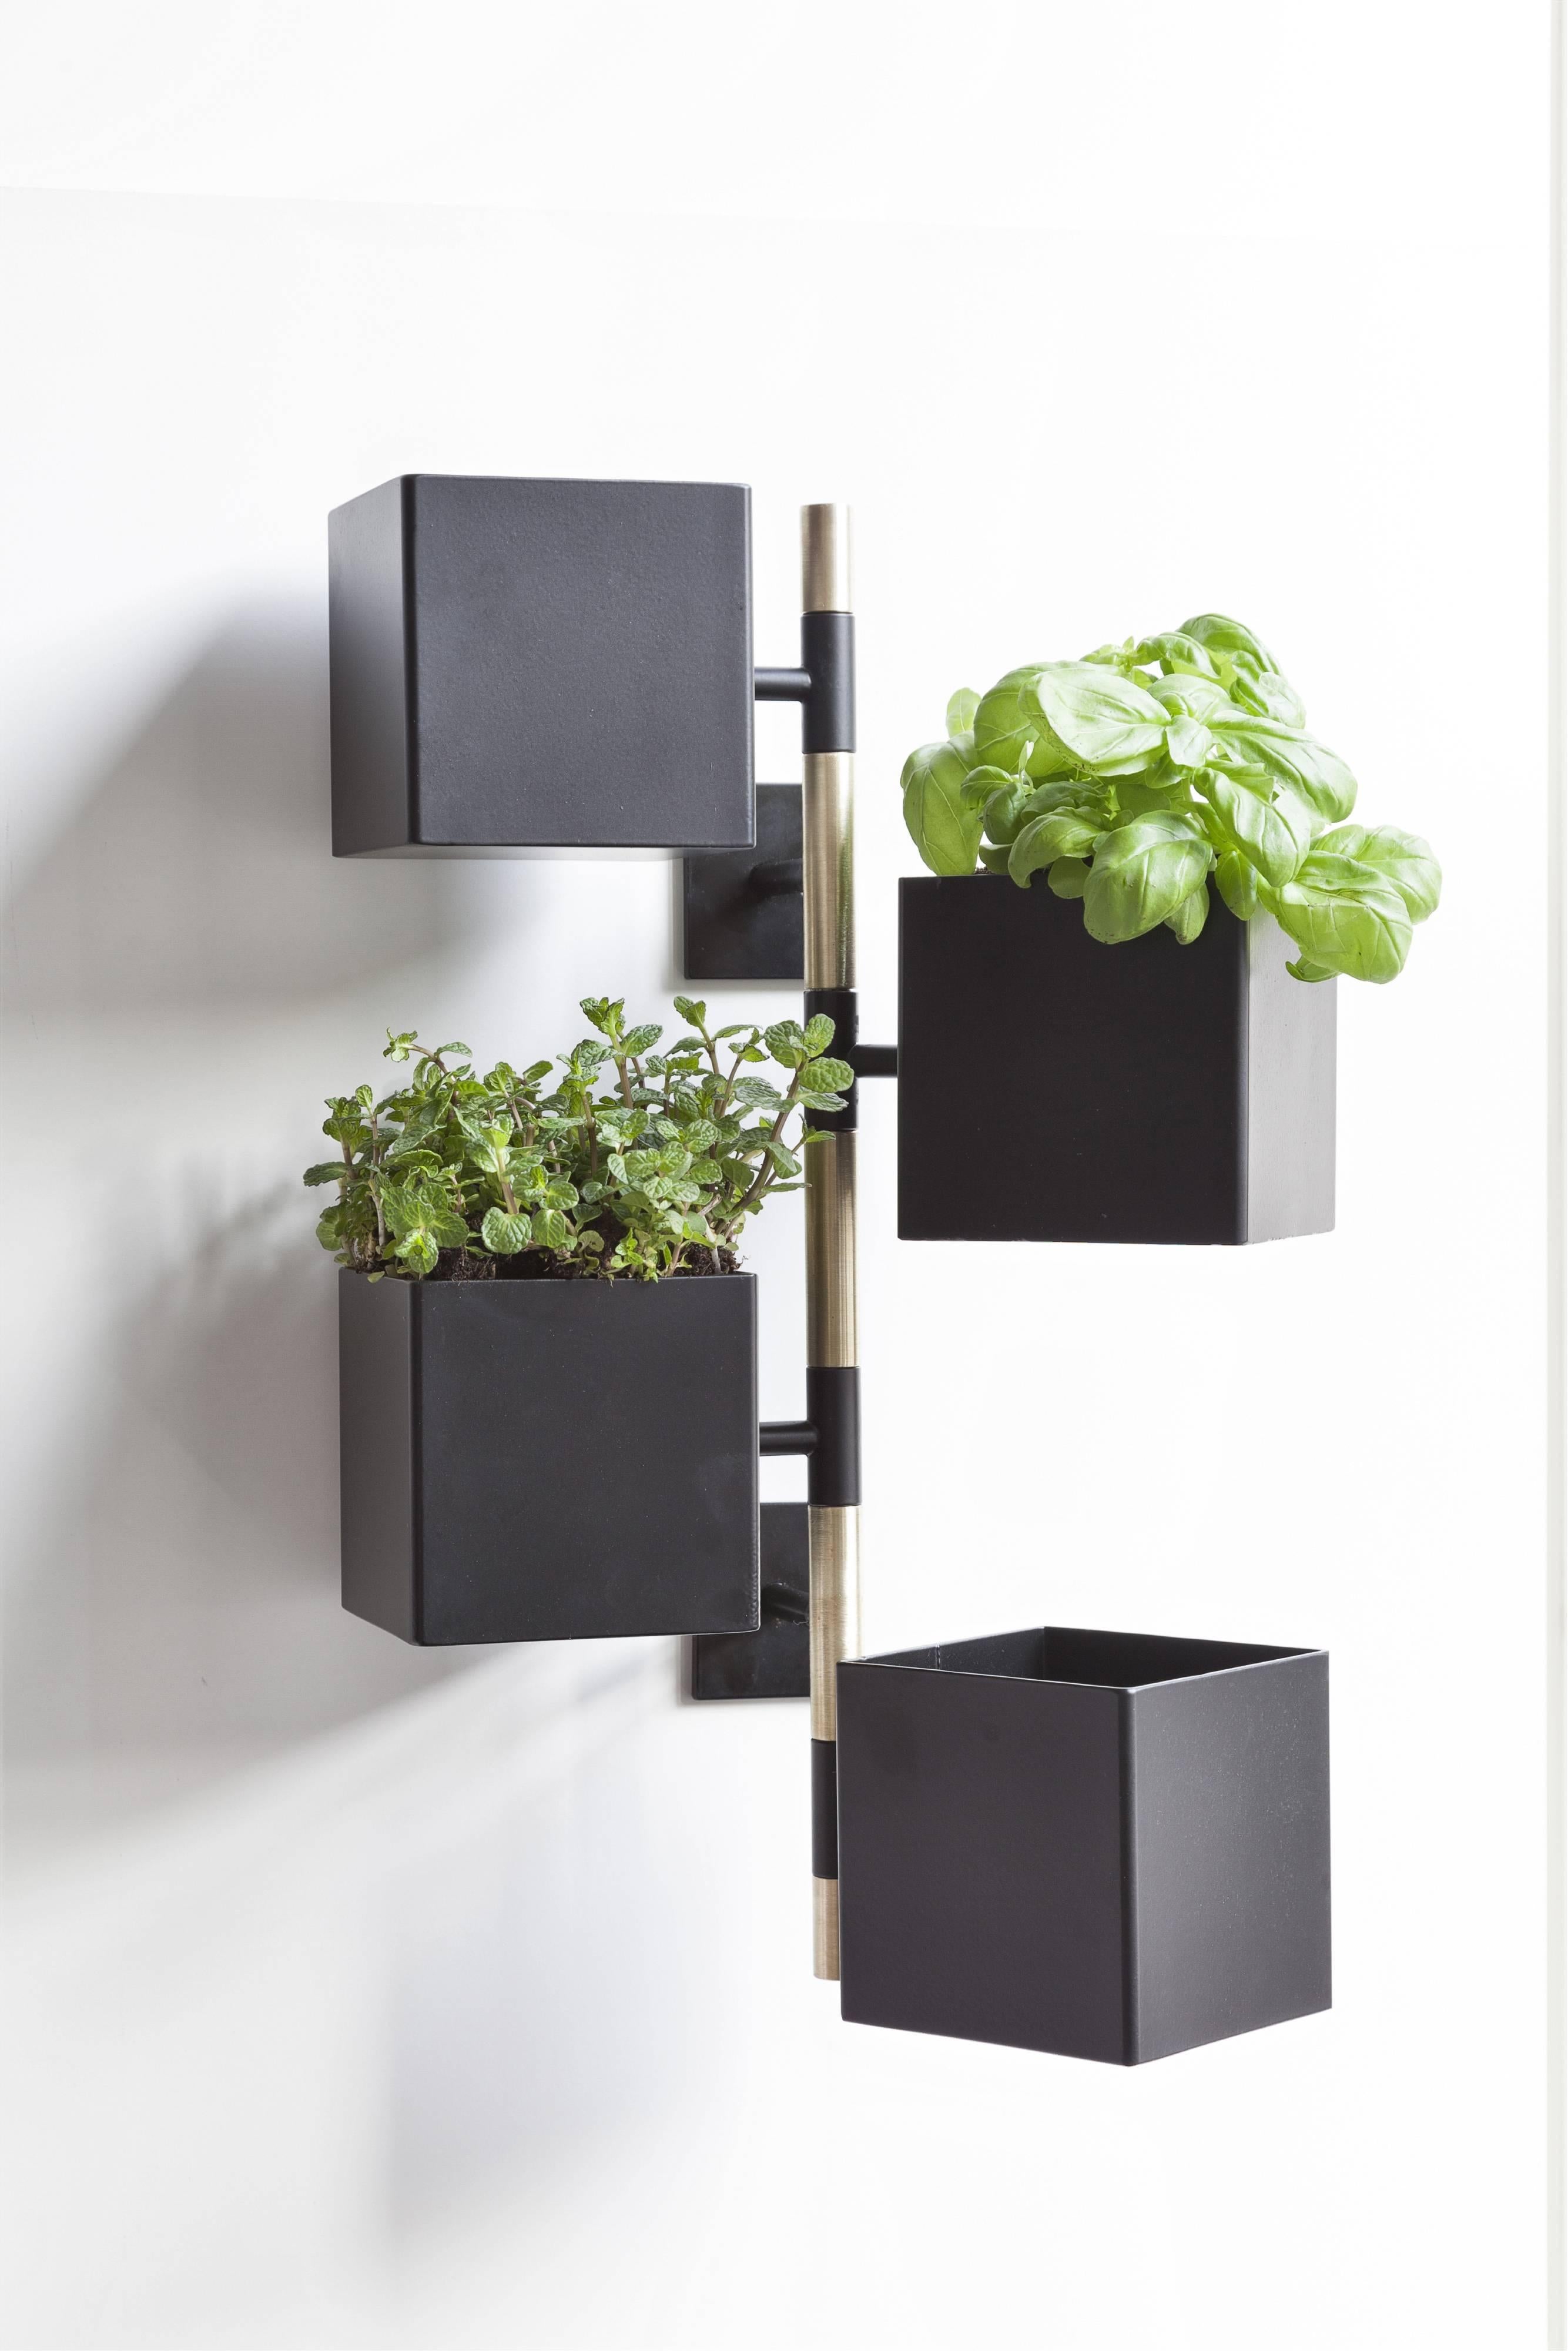 Pochette Is a multifunctional container that can hold small objects such as keys, glasses, phones. It can also be used as vertical garden to place vases and small plants. It is composed by revolving boxes around a vertical axis to be fixed to the